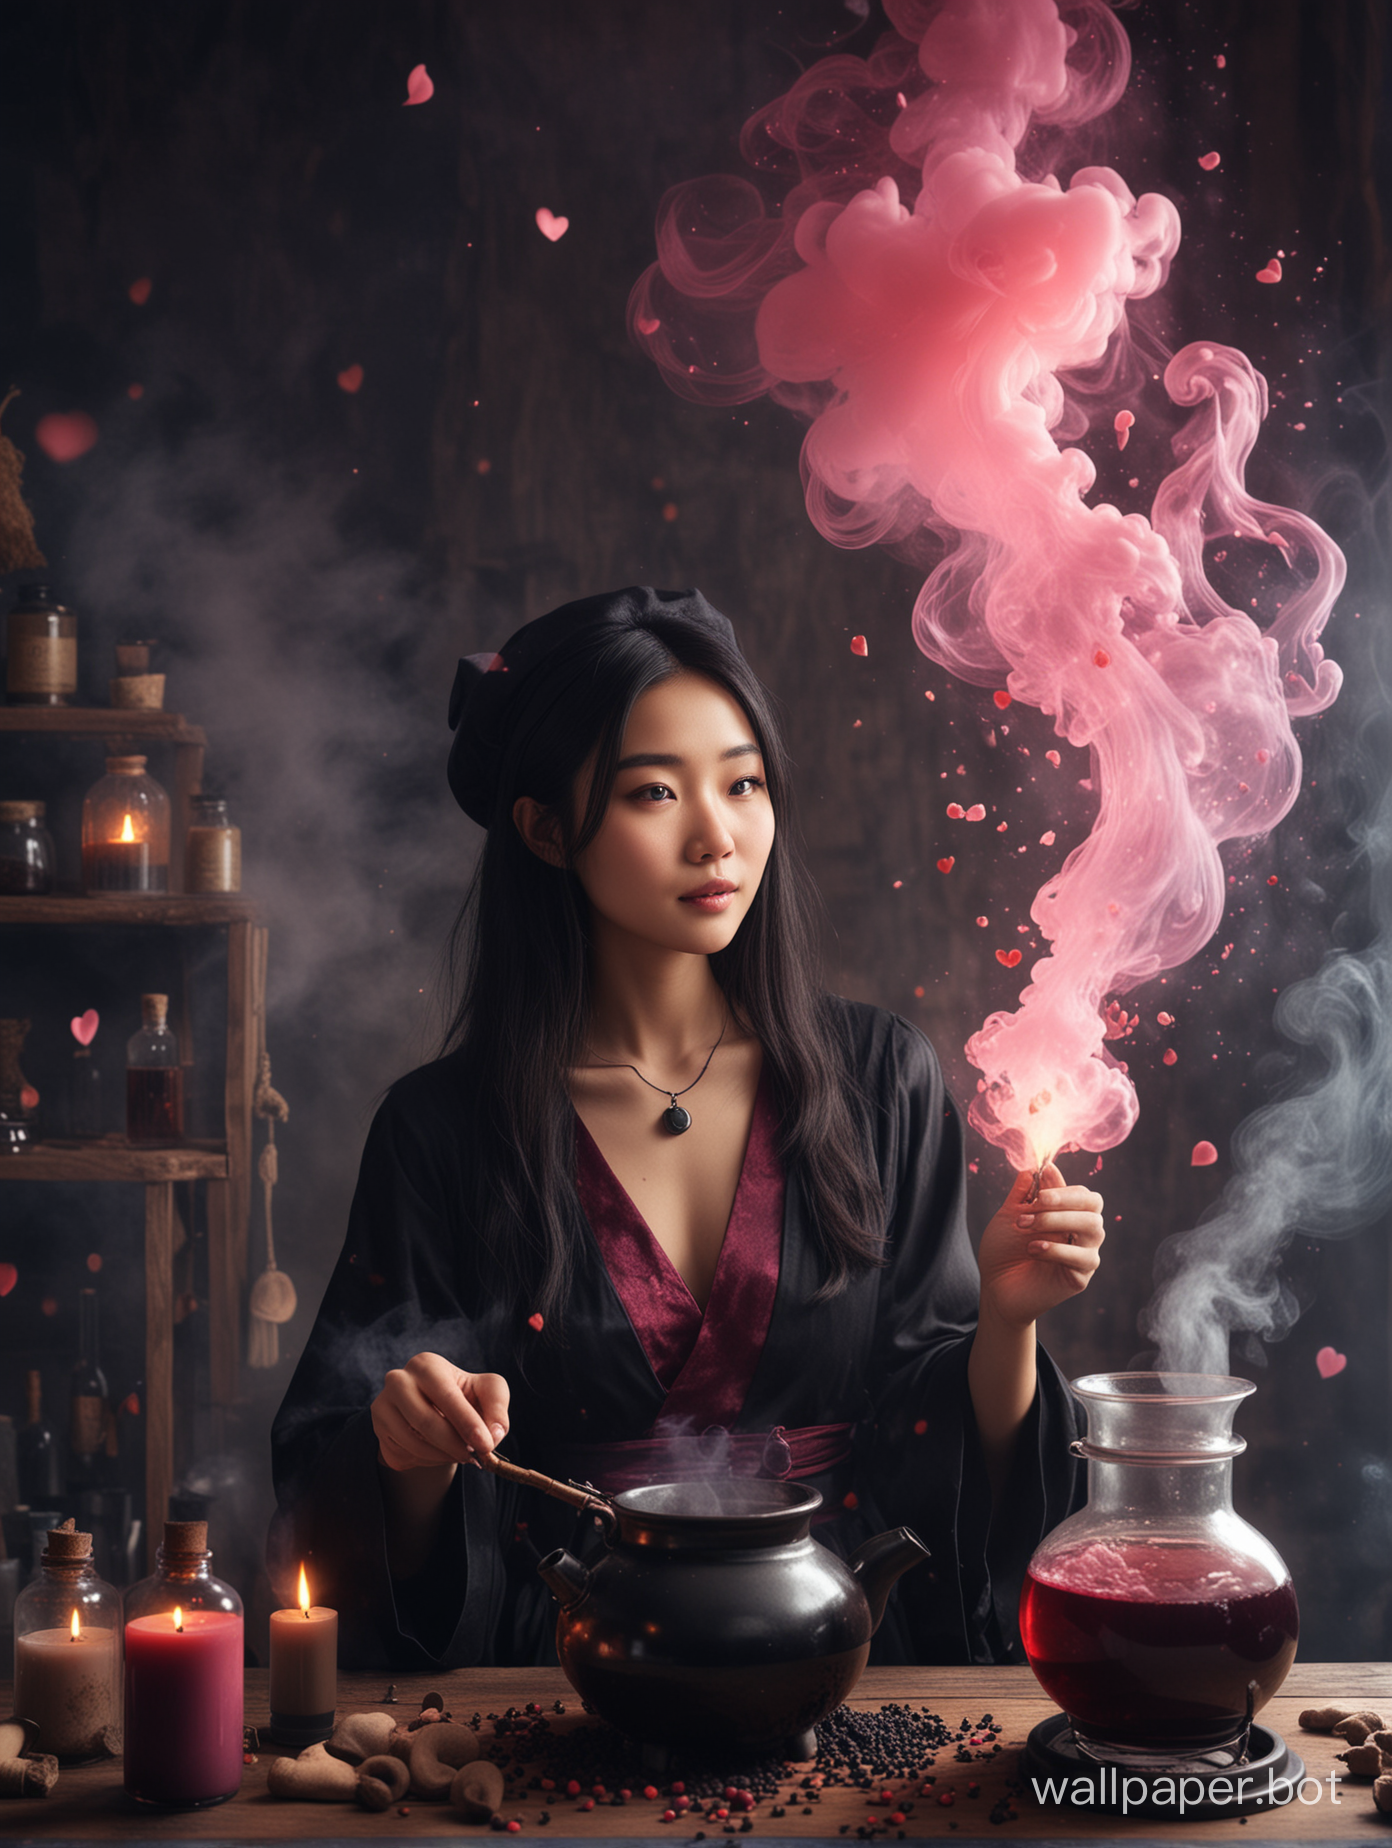 A 25 year old asian witch brewing a love potion, cinematic, imagine a brew with smoky hearts floating into the air, be creative and unrealistic